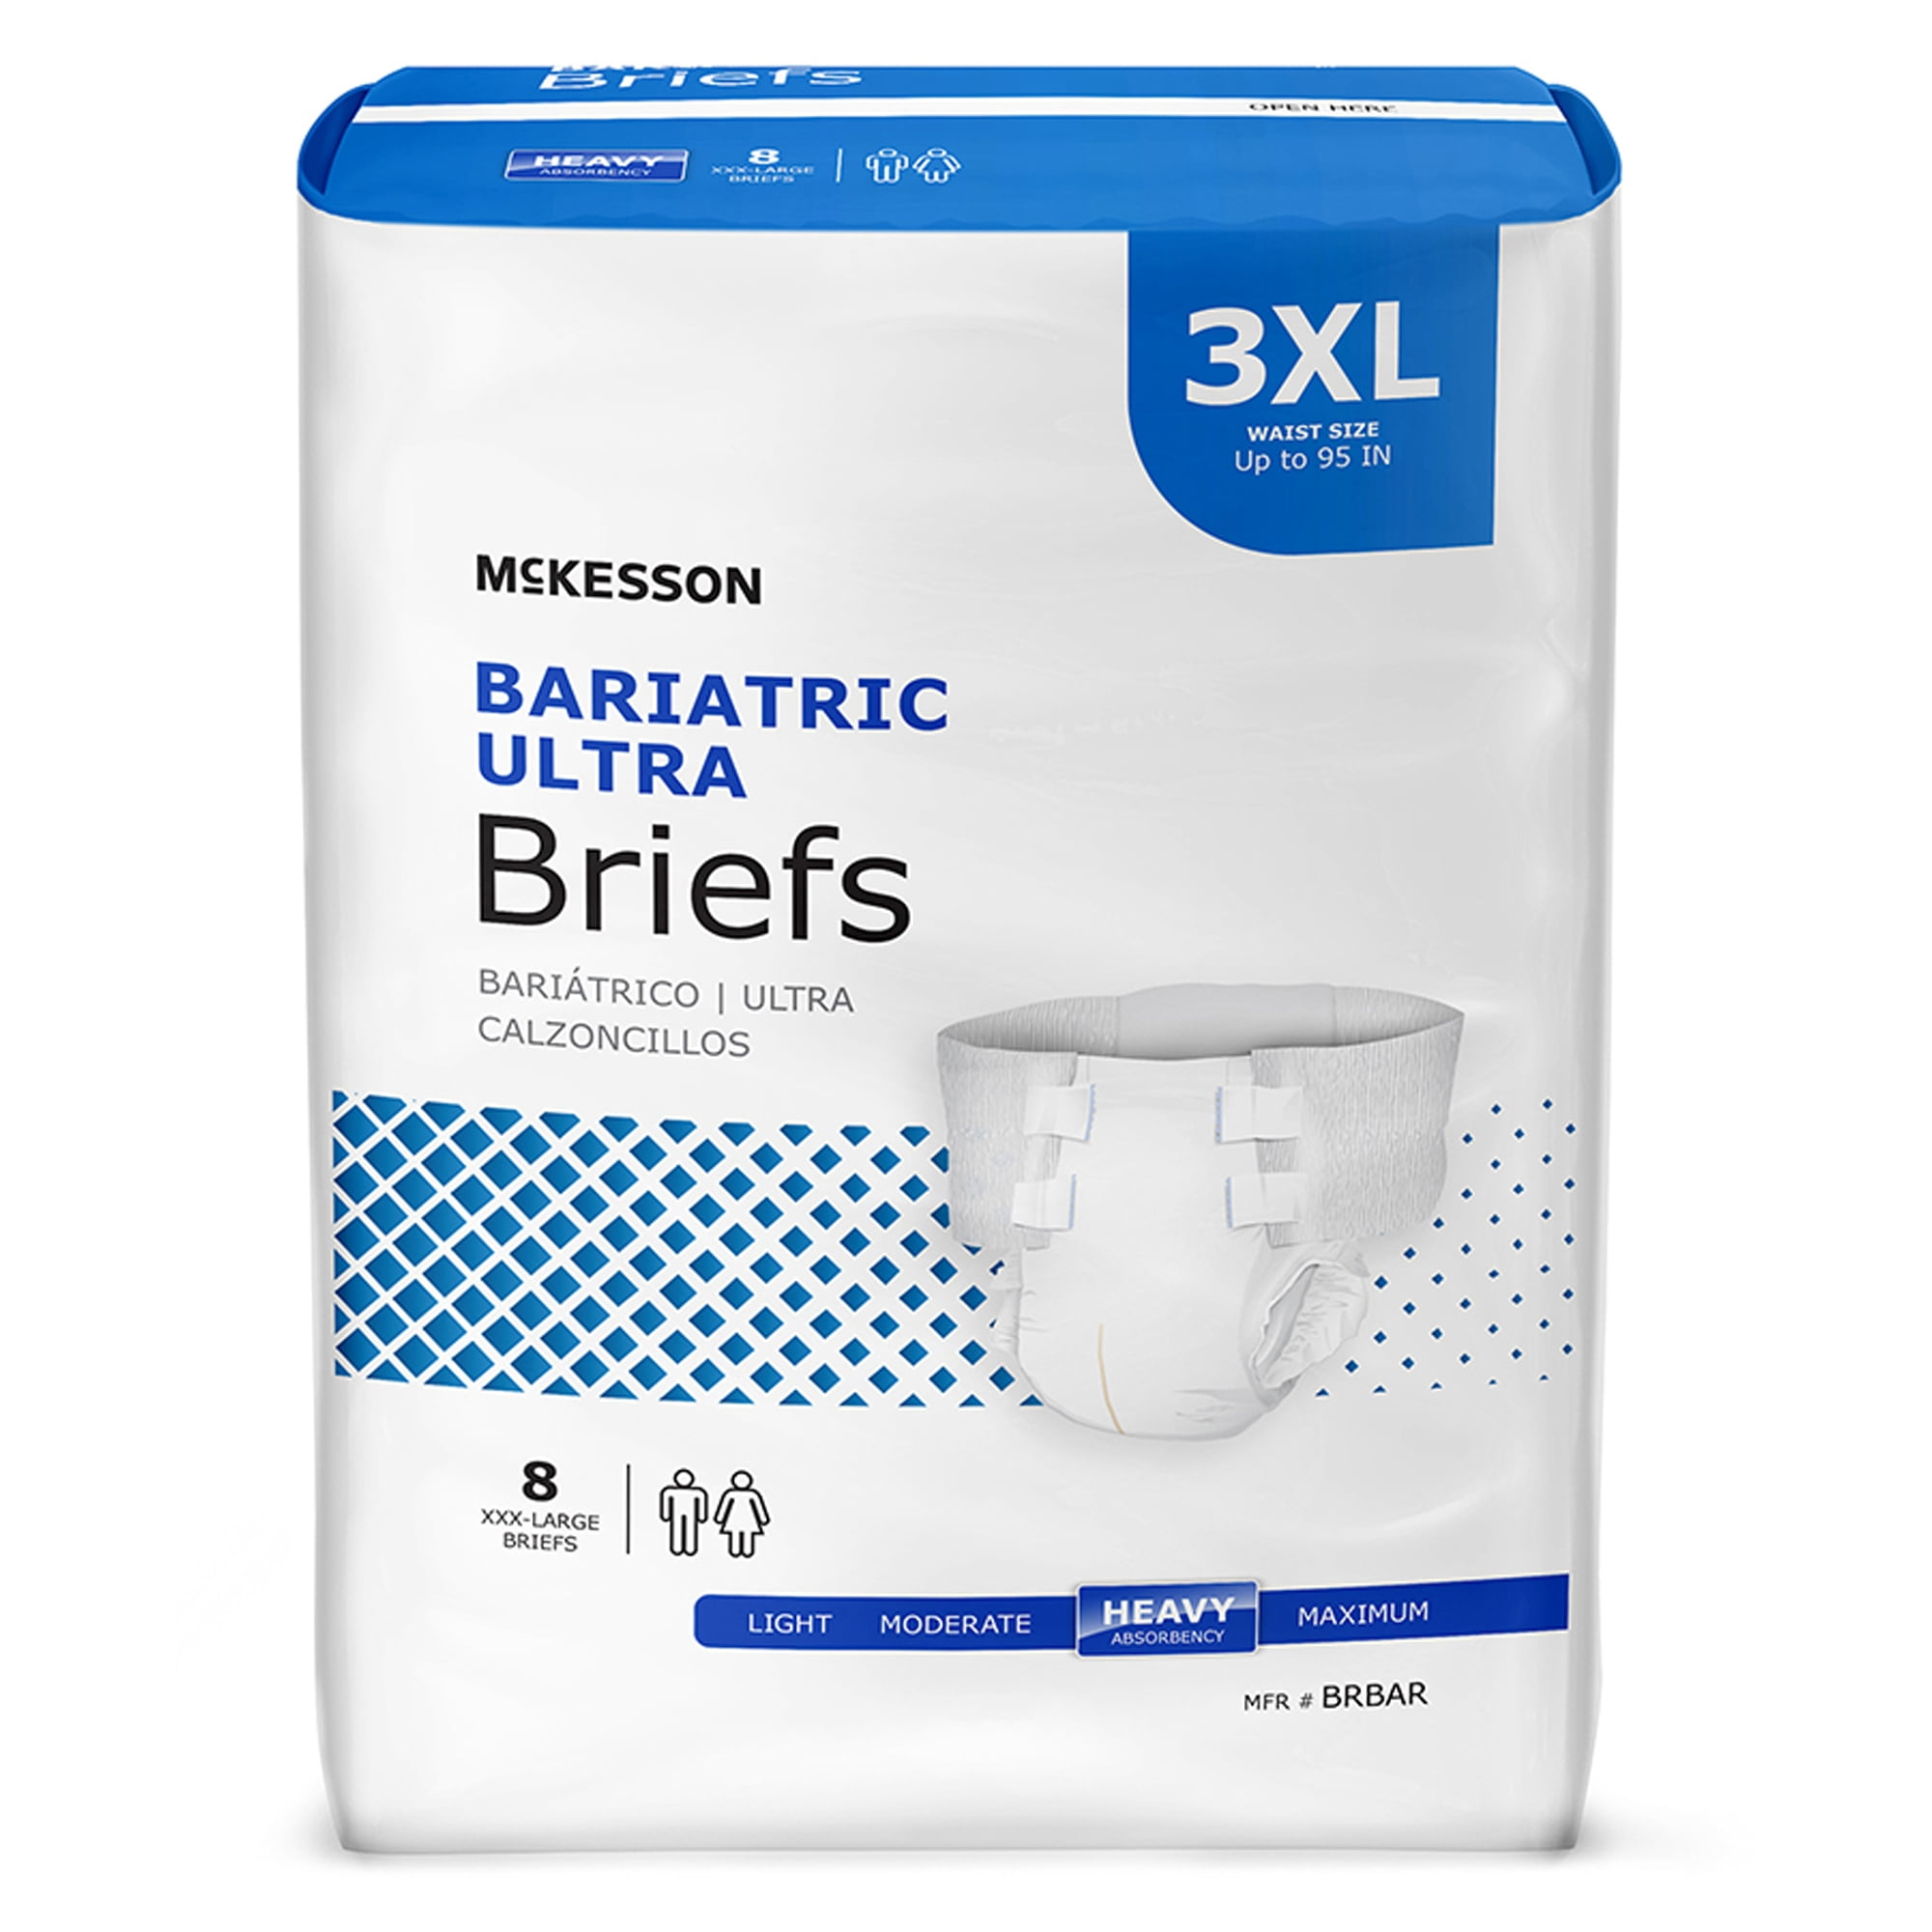 McKesson Bariatric Ultra Briefs for Incontinence, Heavy Absorbency, 3XL, 8  Count, 8 Packs, 8 Total